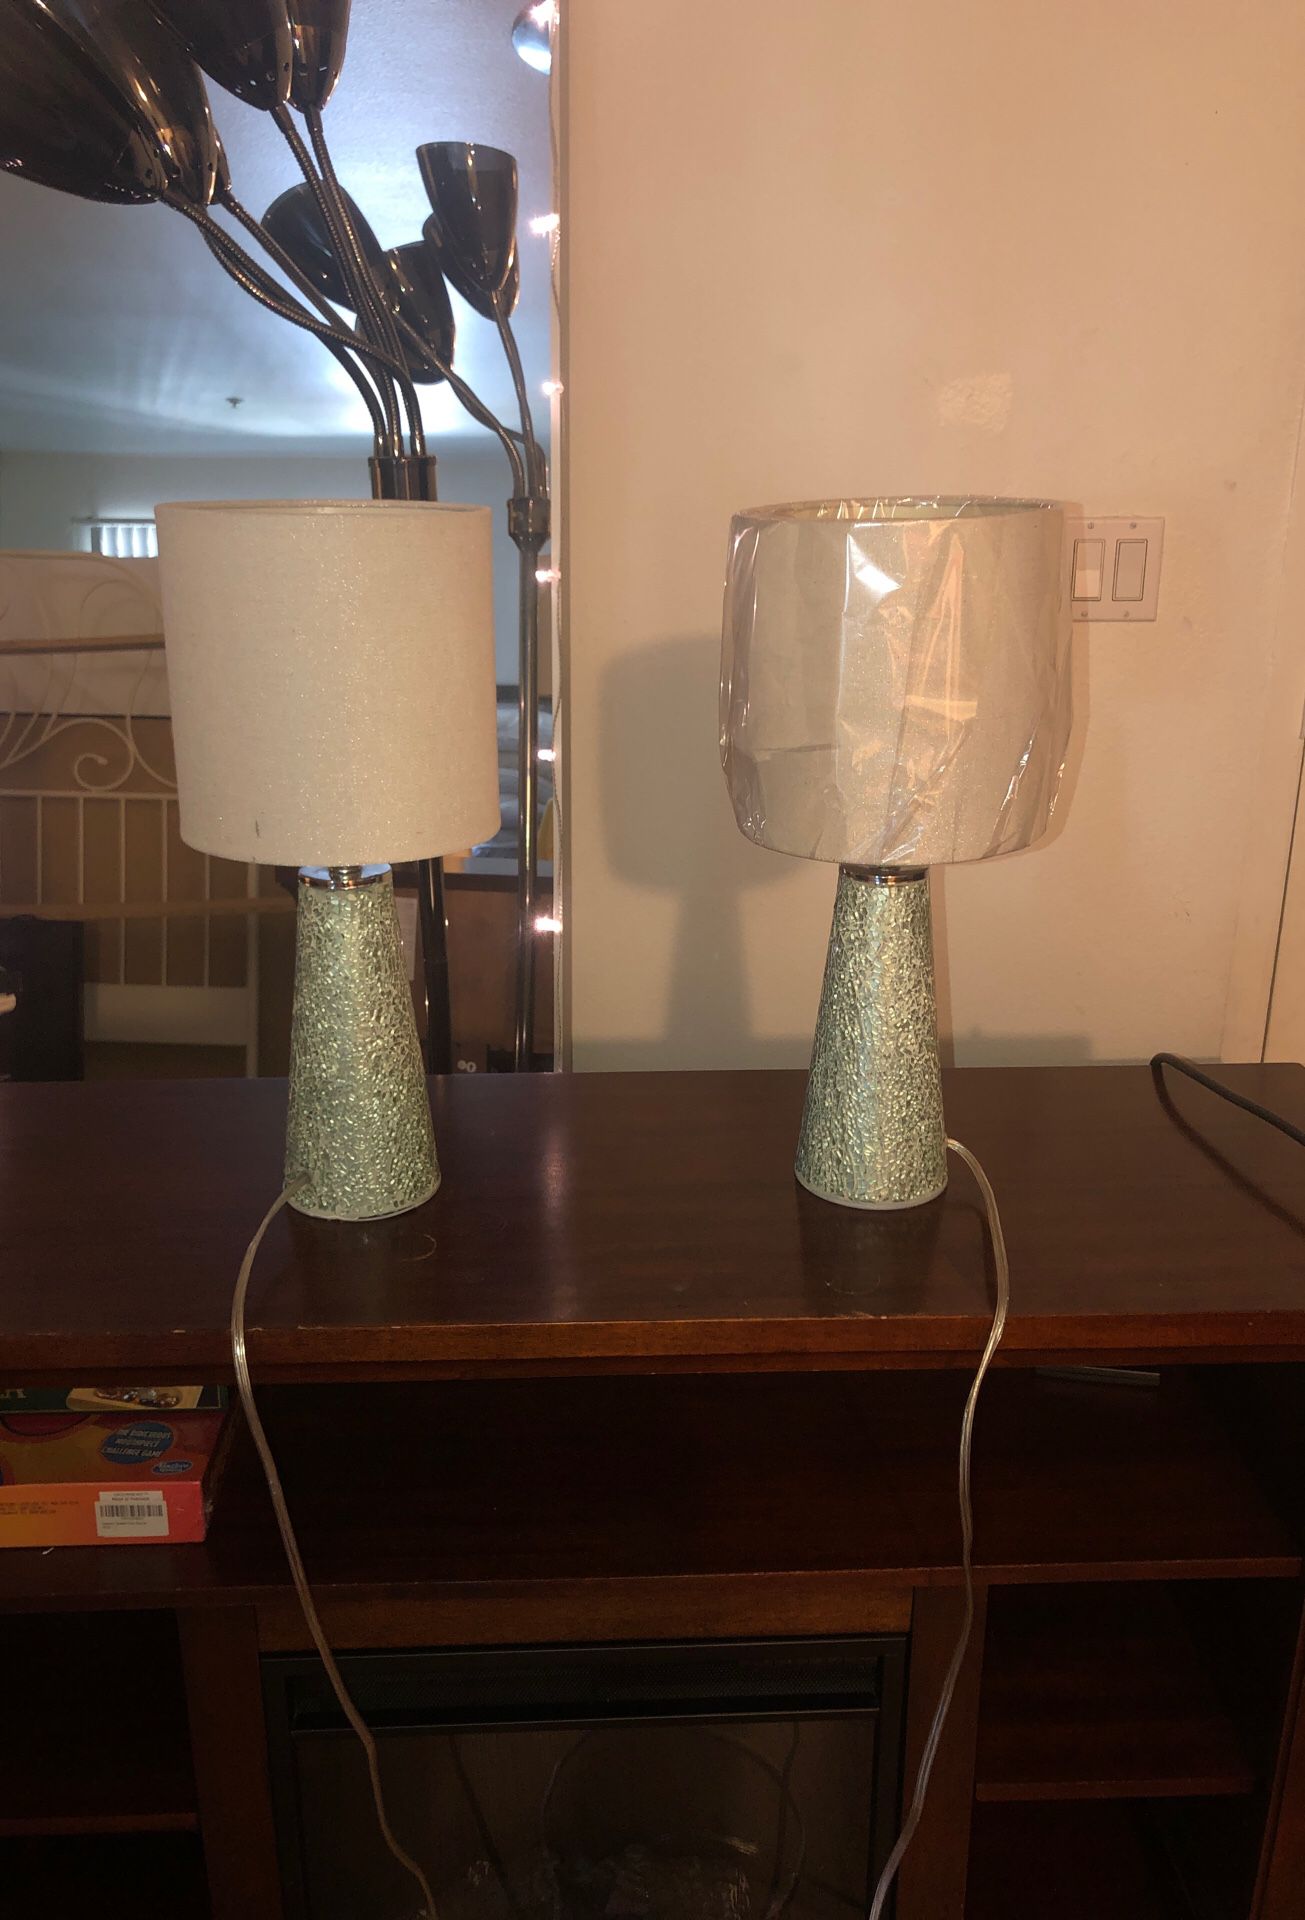 Two cute small turquoise lamps